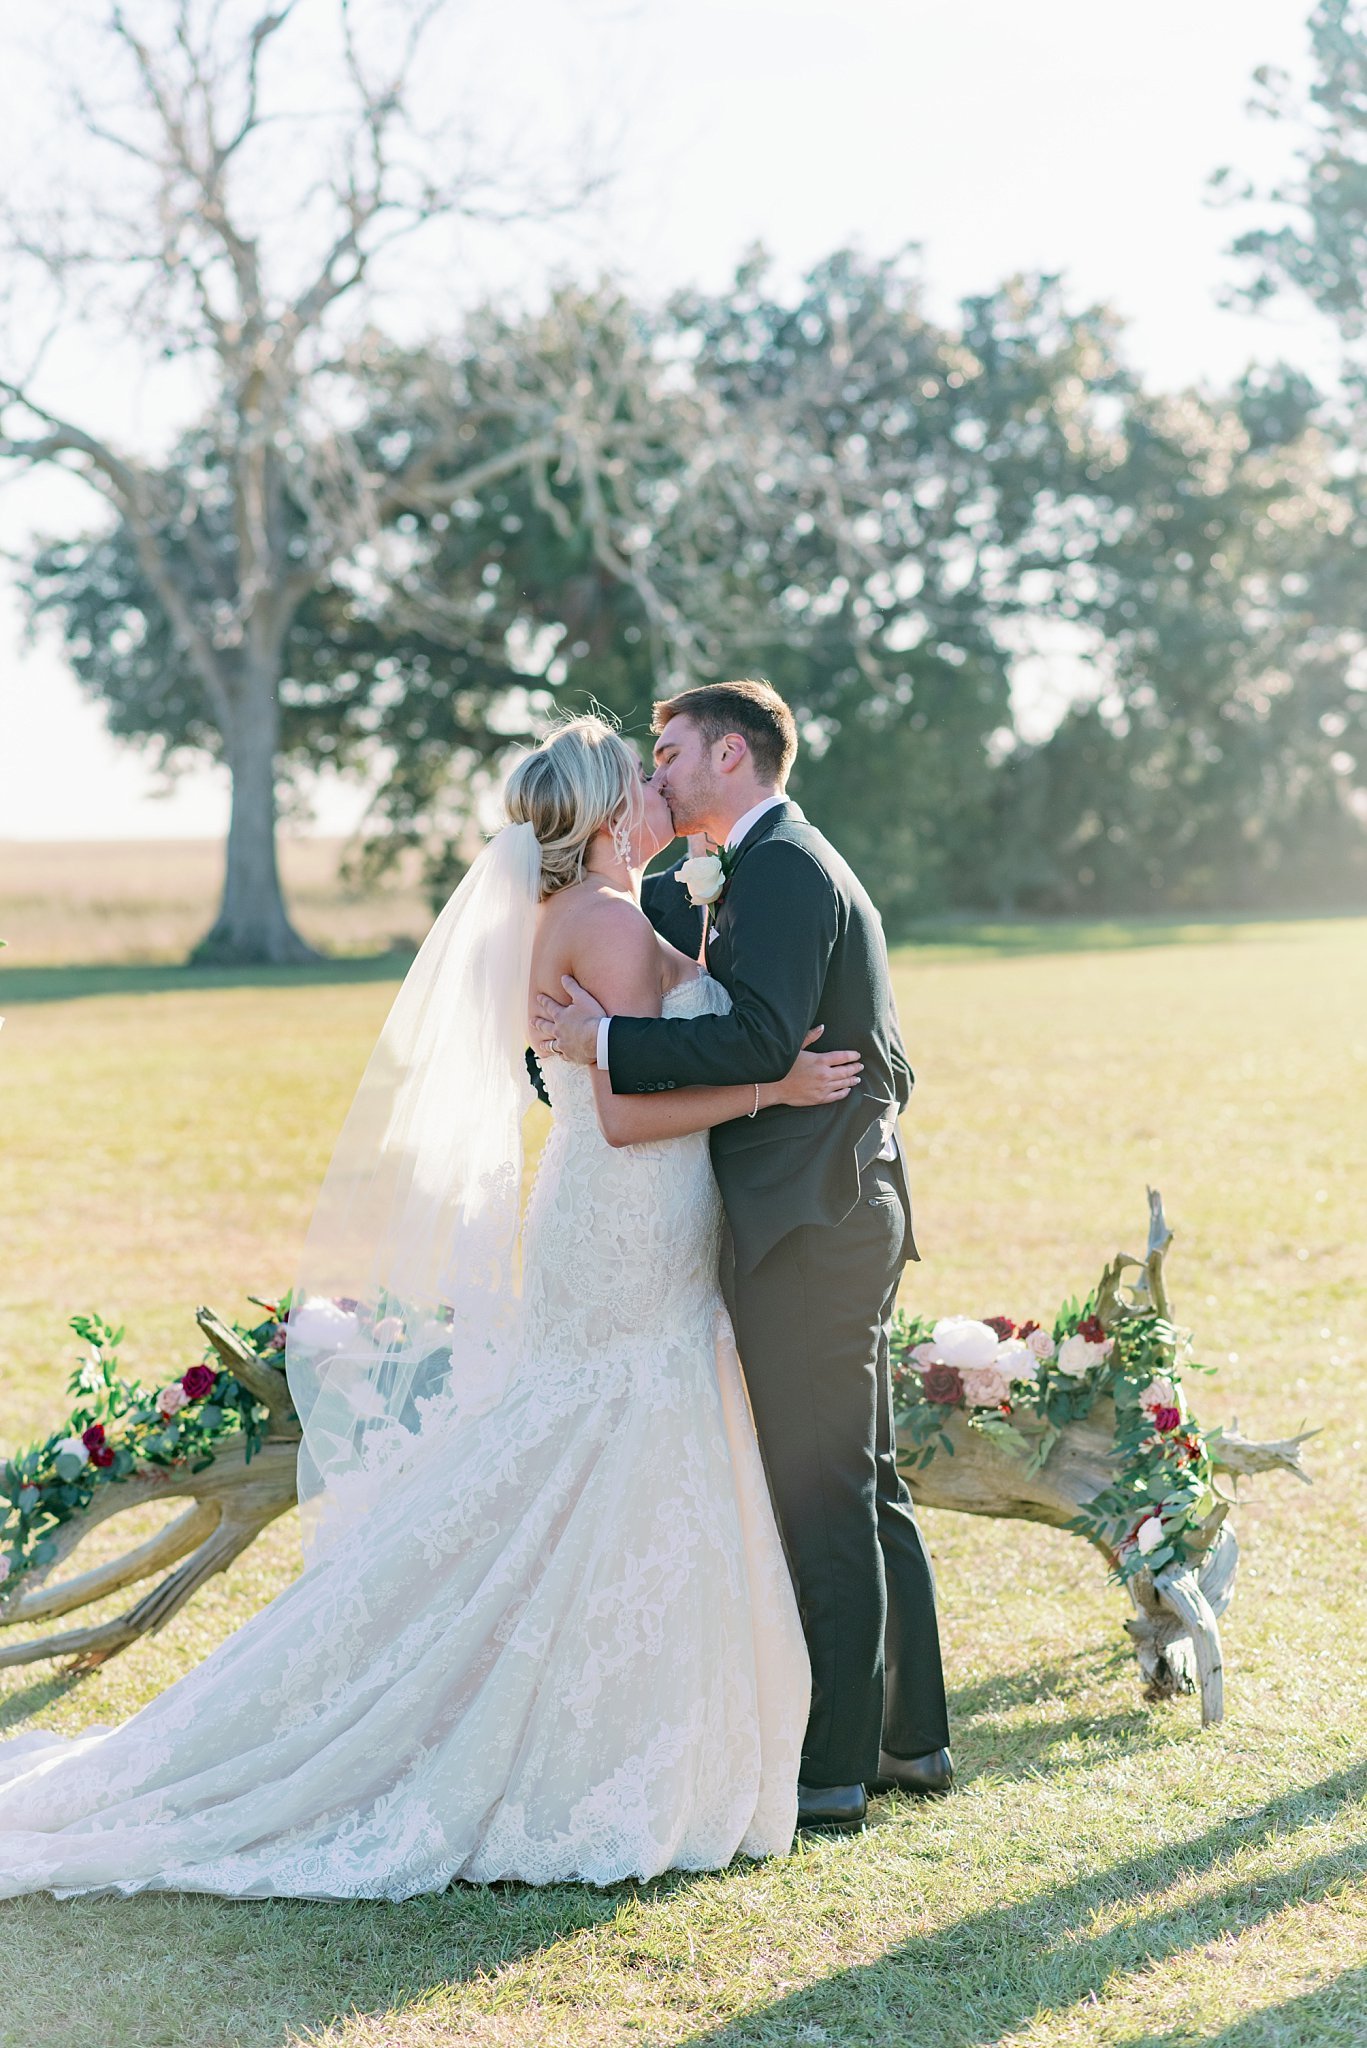 Outdoor wedding in Beaufort South Carolina by the waterfront photographed by a Beaufort wedding photographer.